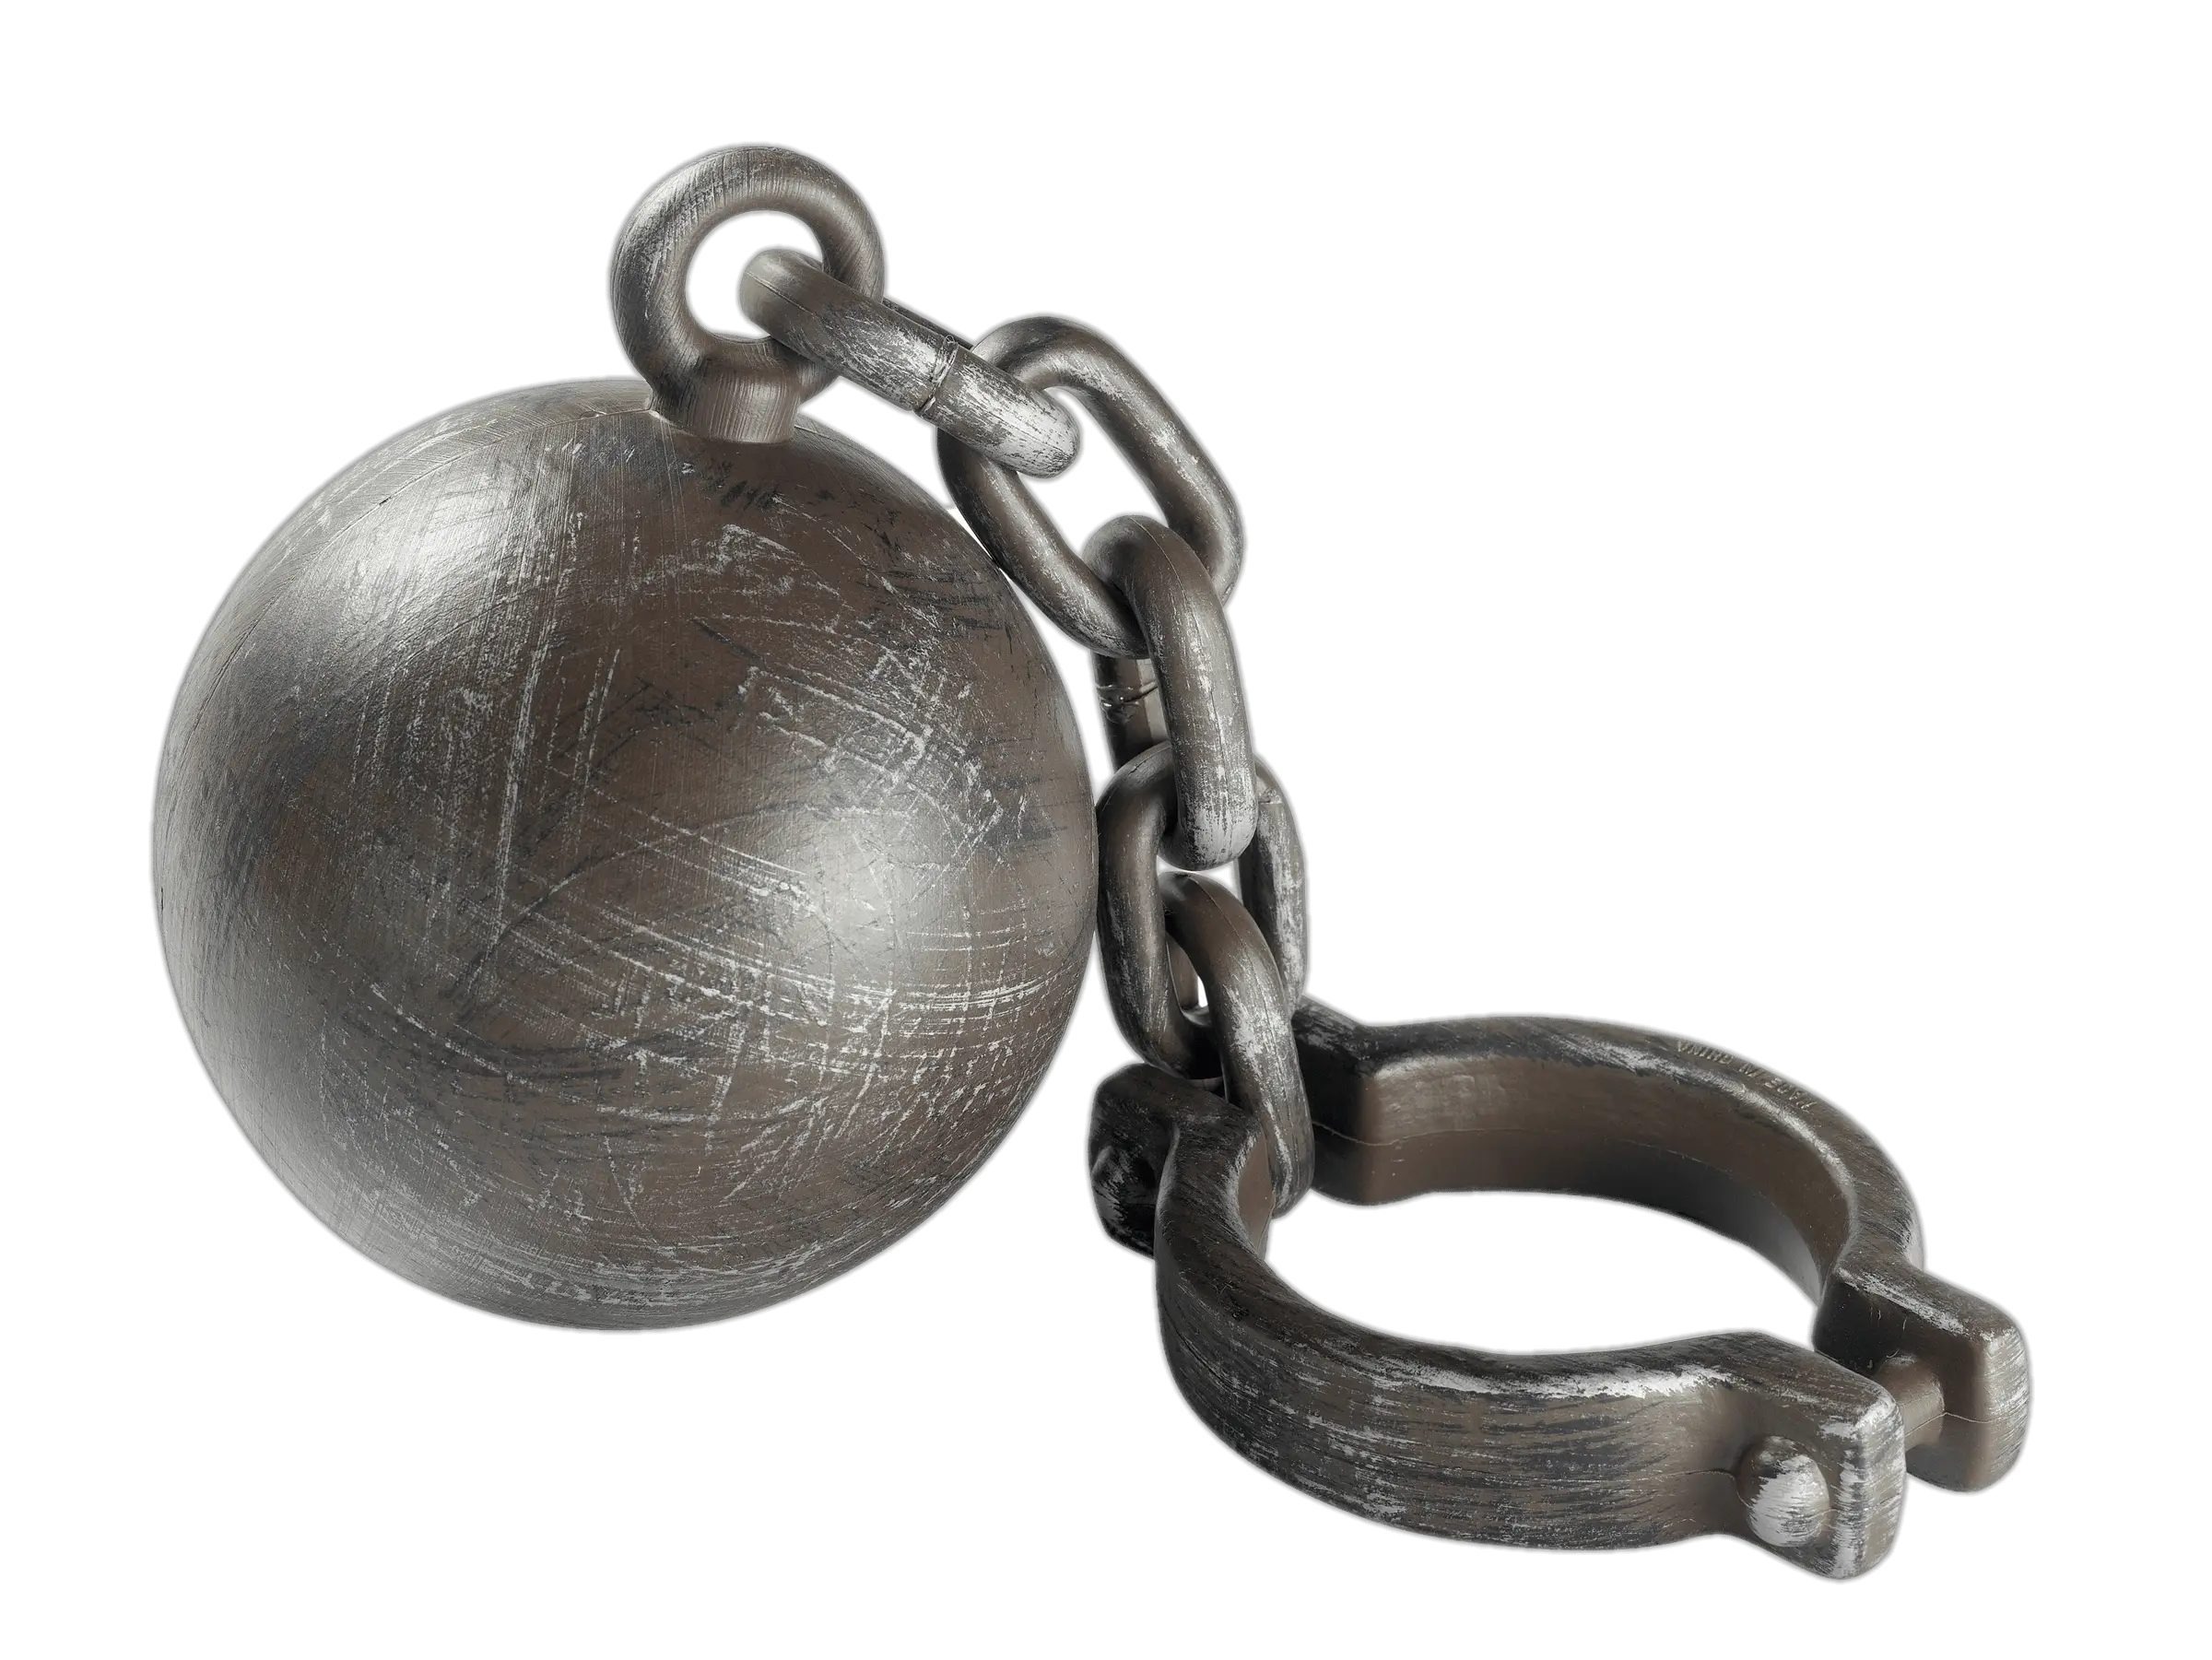 Folsom Prison Ball And Chain Transparent Png Stickpng Convict Ball And Chain Prison Png